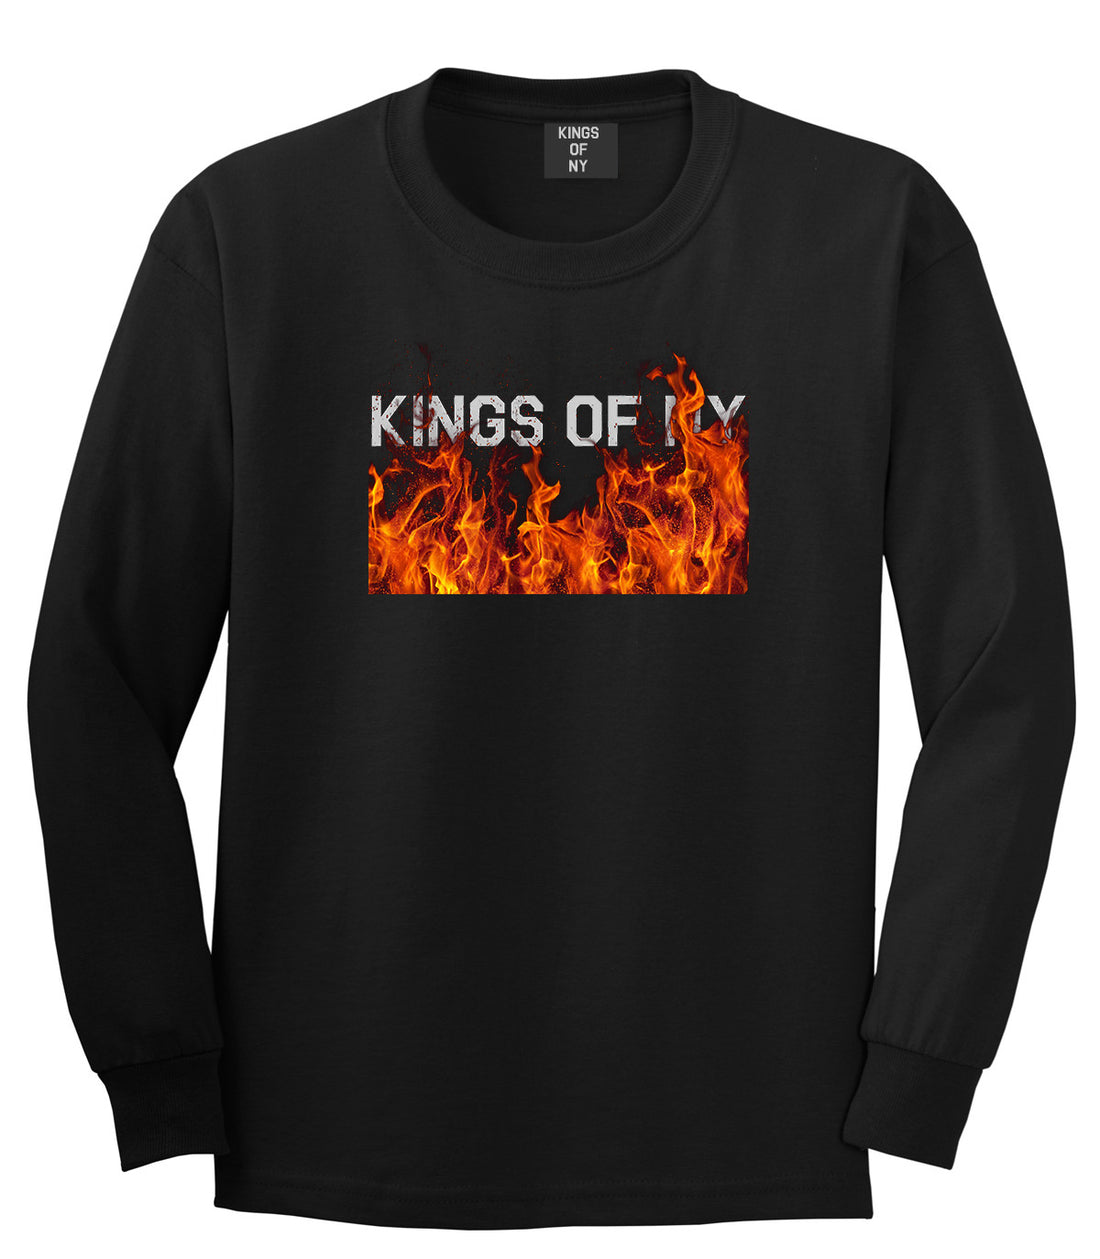 Rising From The Flames Long Sleeve T-Shirt in Black